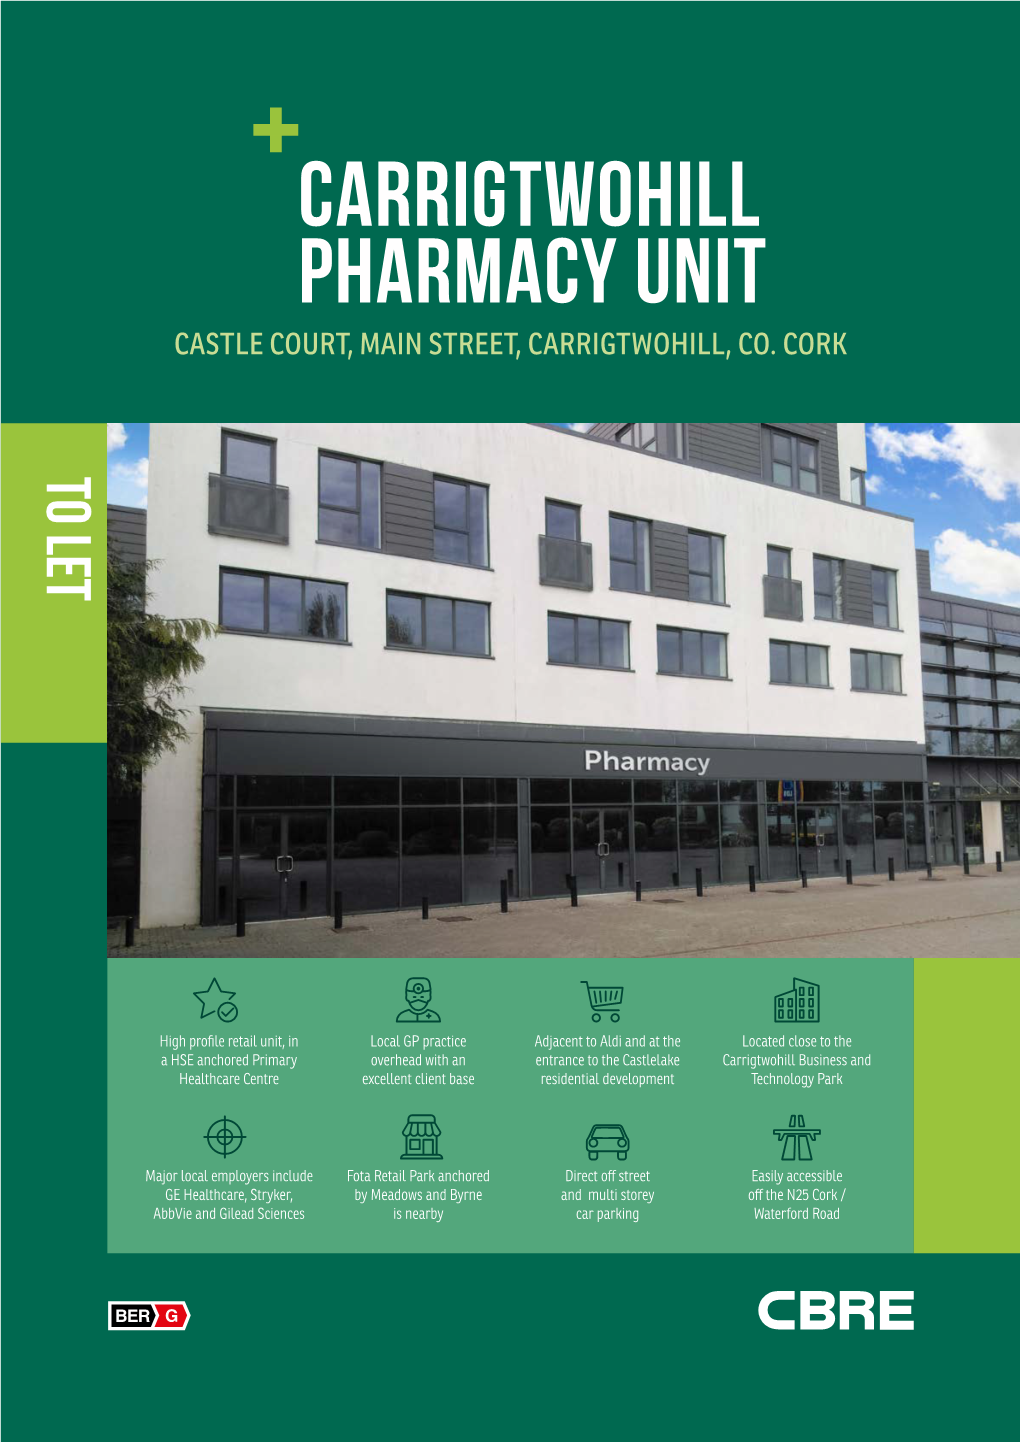 Carrigtwohill Pharmacy Unit CASTLE COURT, MAIN STREET, CARRIGTWOHILL, CO